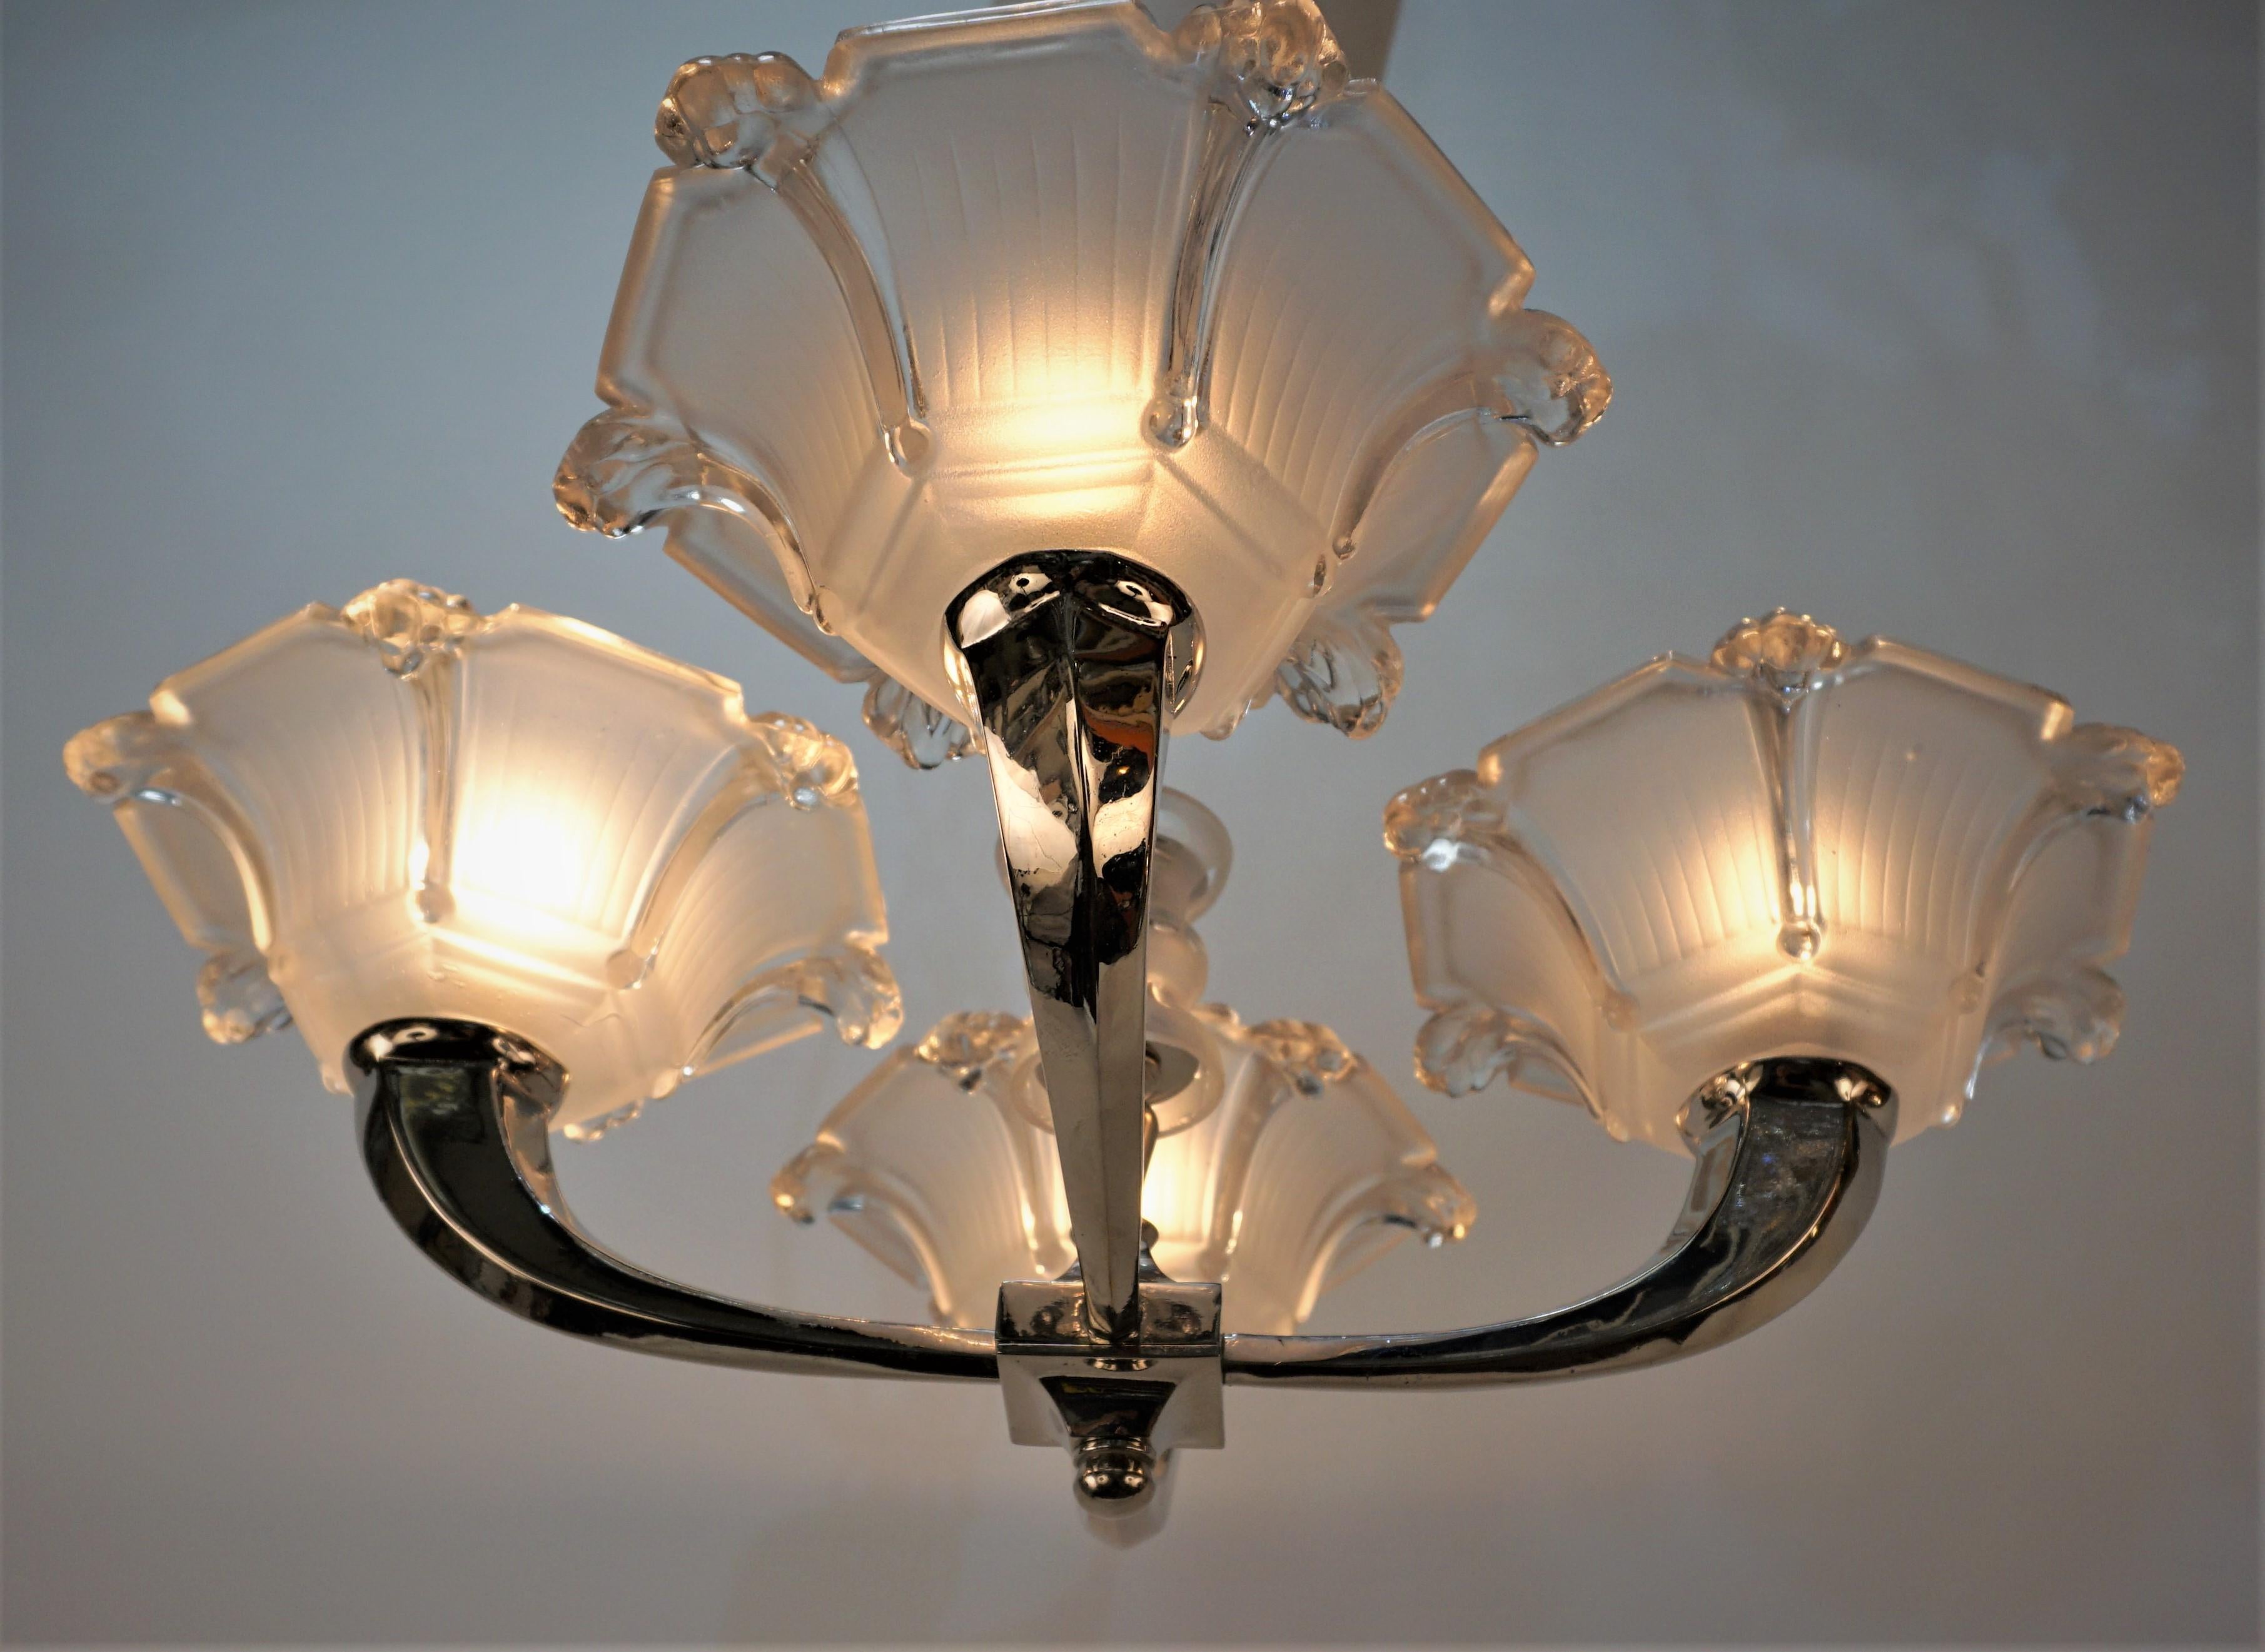 Clear frost glass, nickel on bronze frame 1920's art deco semi flush mount chandelier.
Professionally rewired and ready for installation.
Measurement: height 13